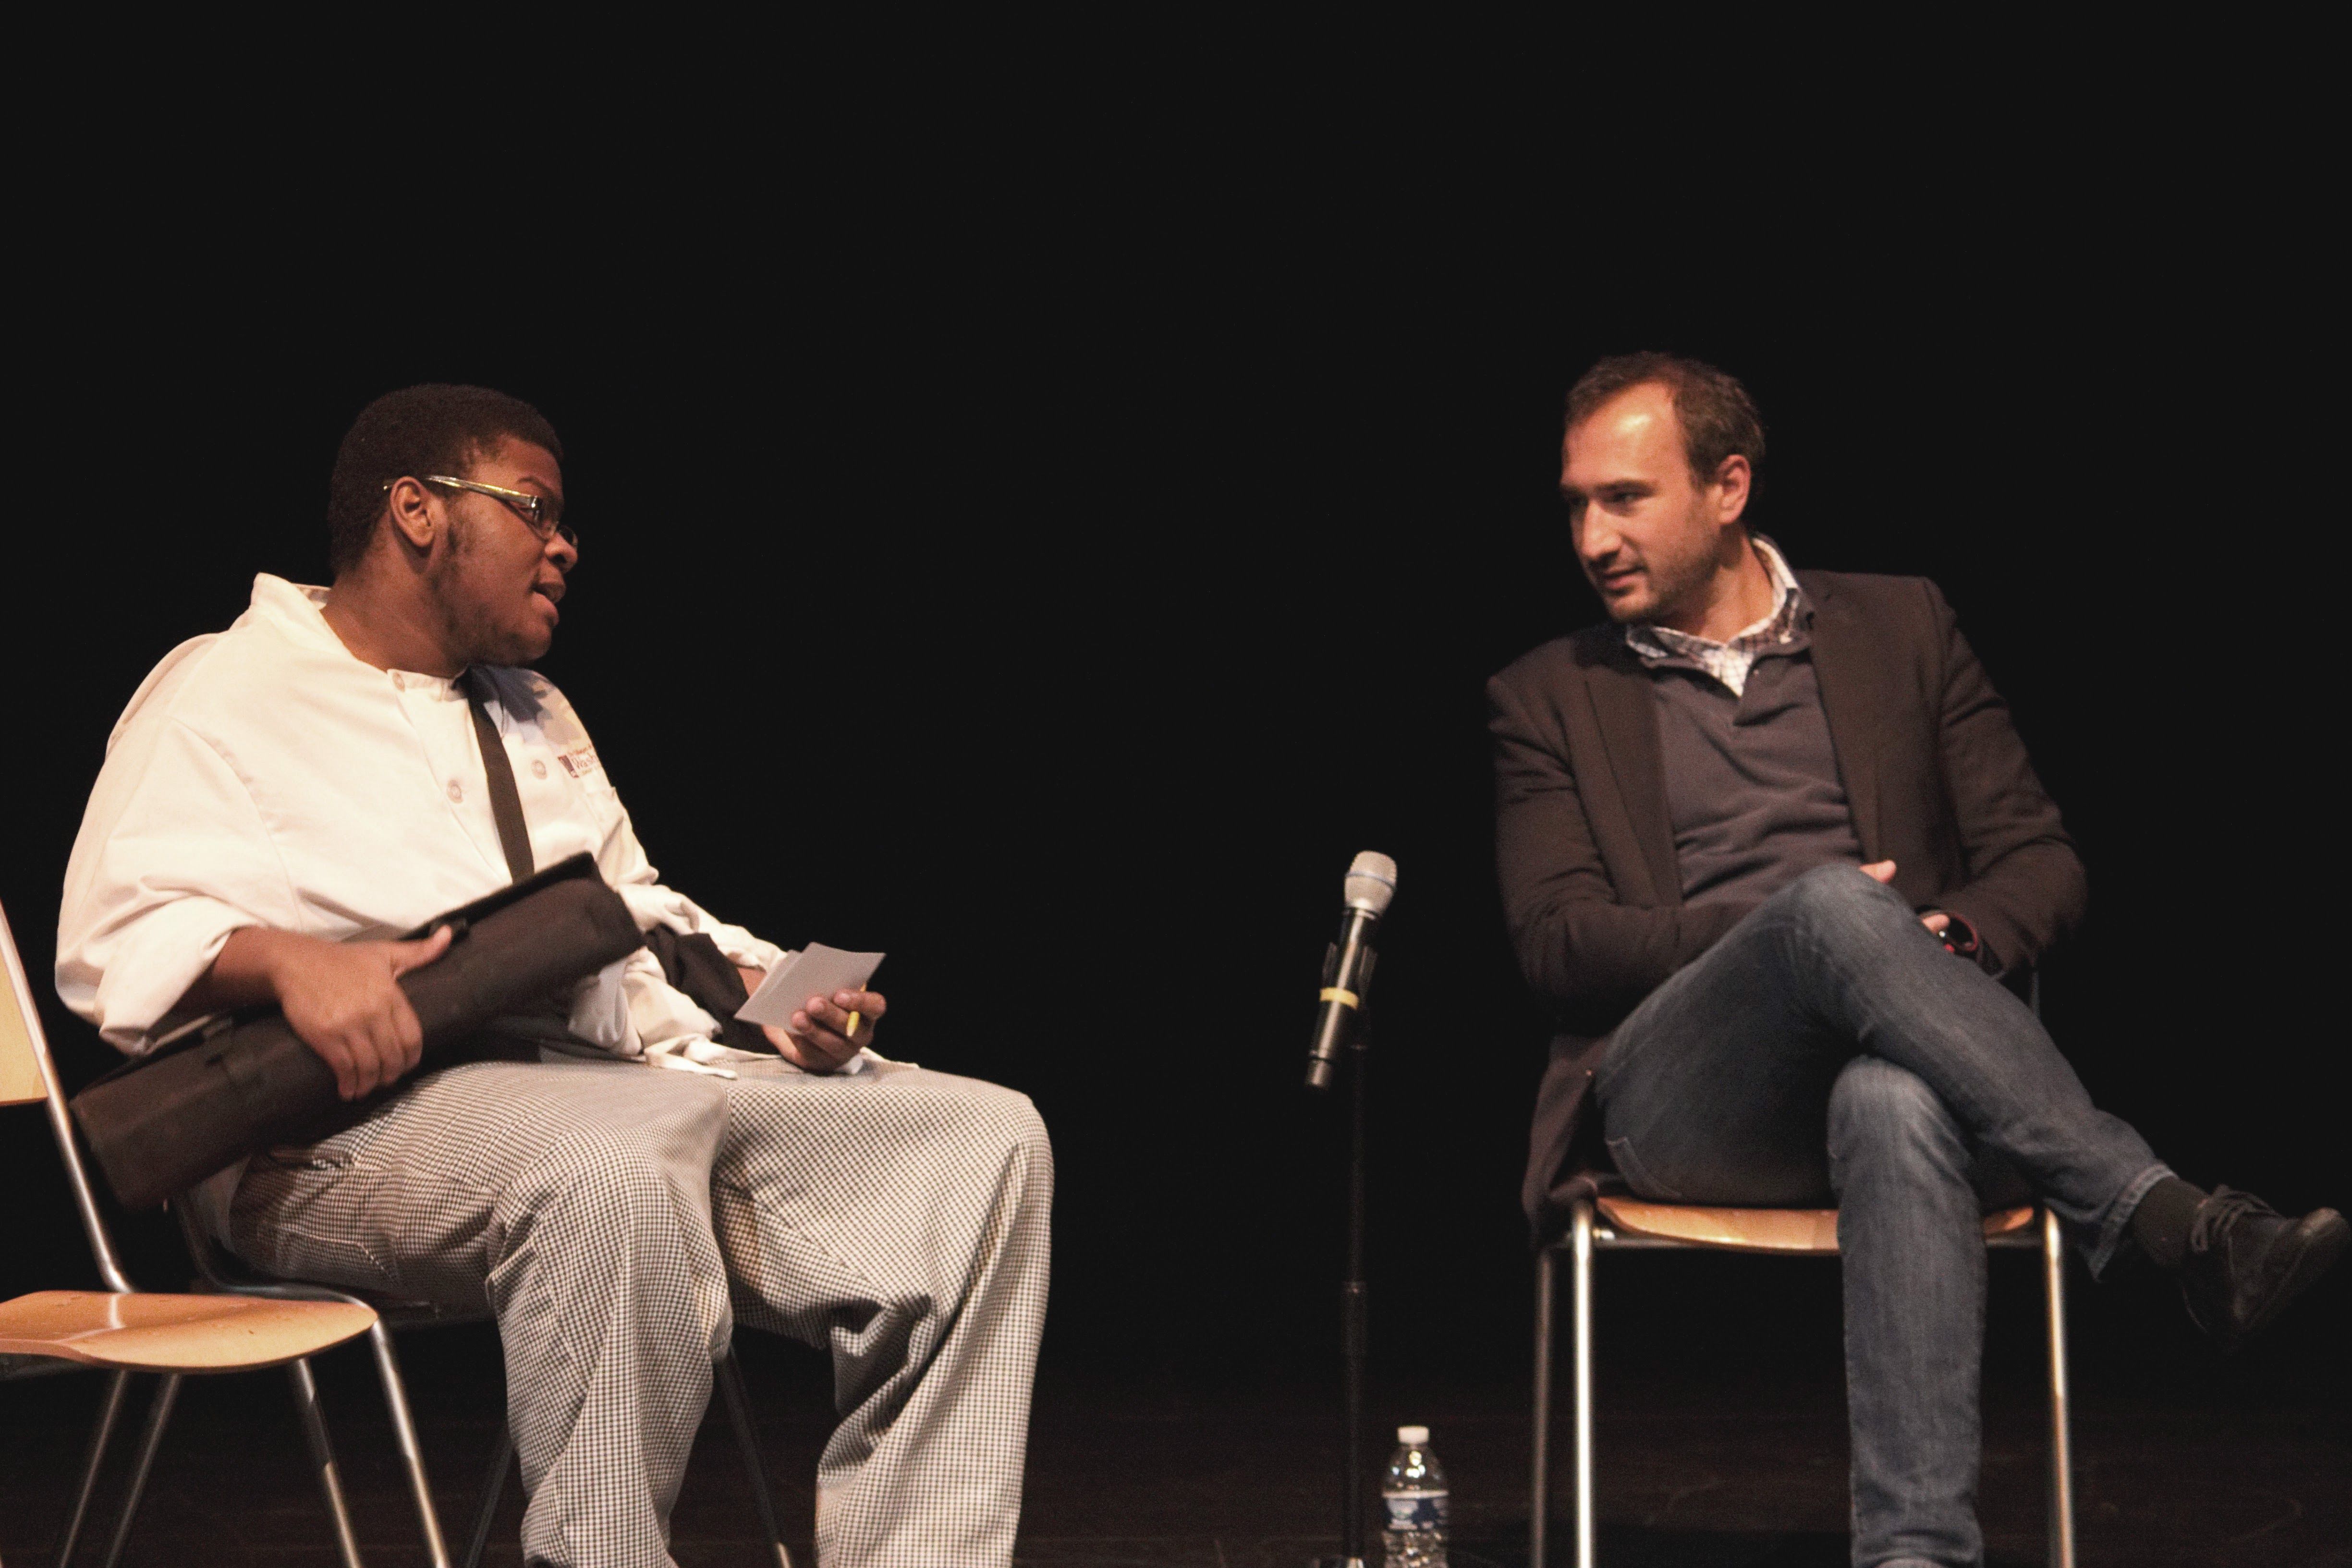 A Washburne Culinary Institute student asks Karim Chrobog questions about food waste after the screening of 'Wasted.' Image by Lauren Shepherd. U.S., 2016.